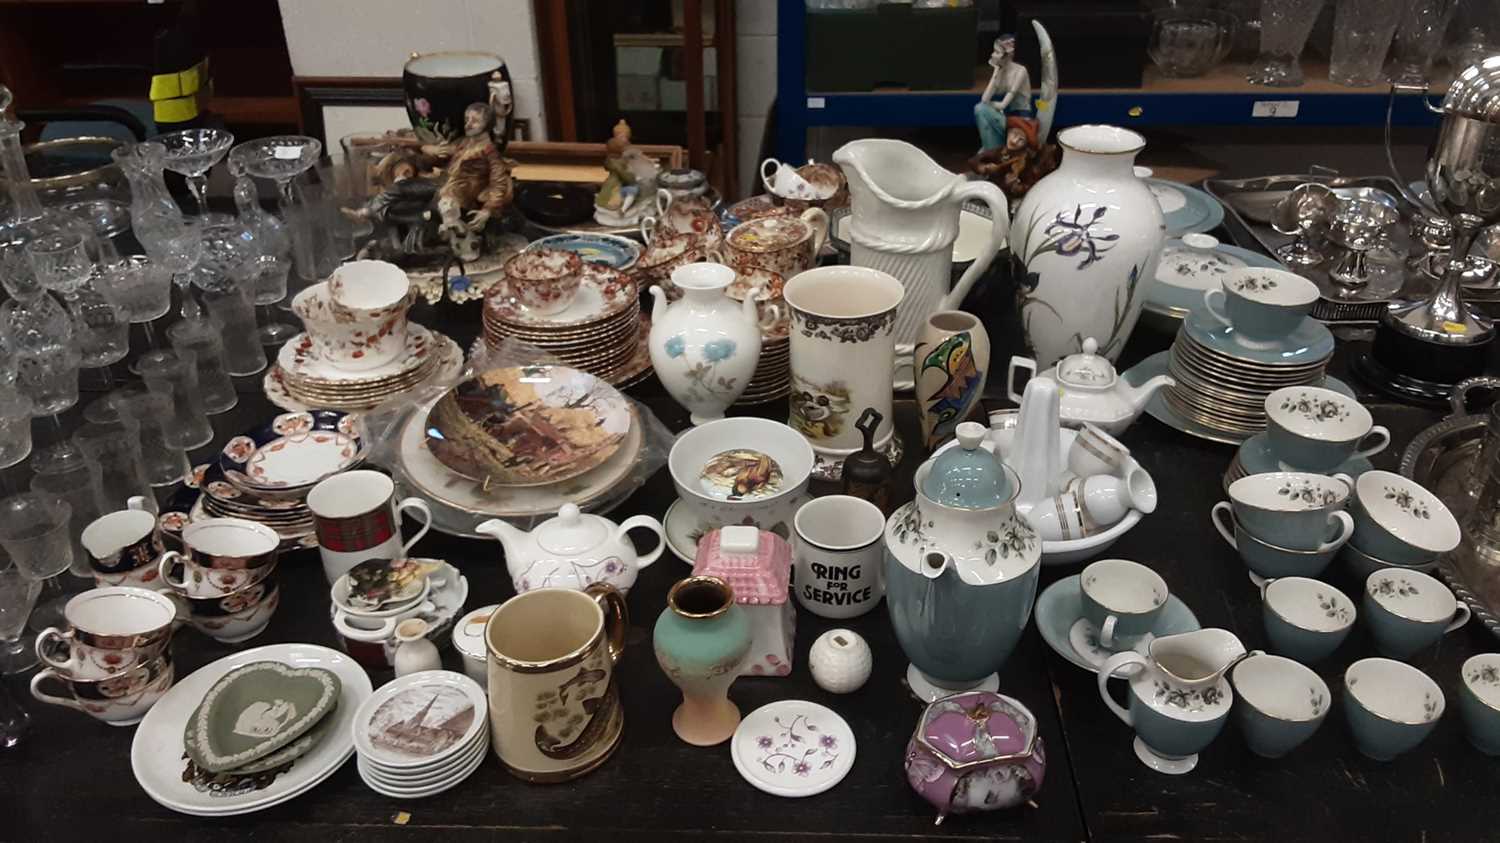 Lot 145 - Large quantity of of ceramics including Wedgwood Ice Rose vase, Meadowland Bird vase by Franklin Porcelain, Royal Doulton Rose Elegans TC1010 part tea, coffee and dinner service